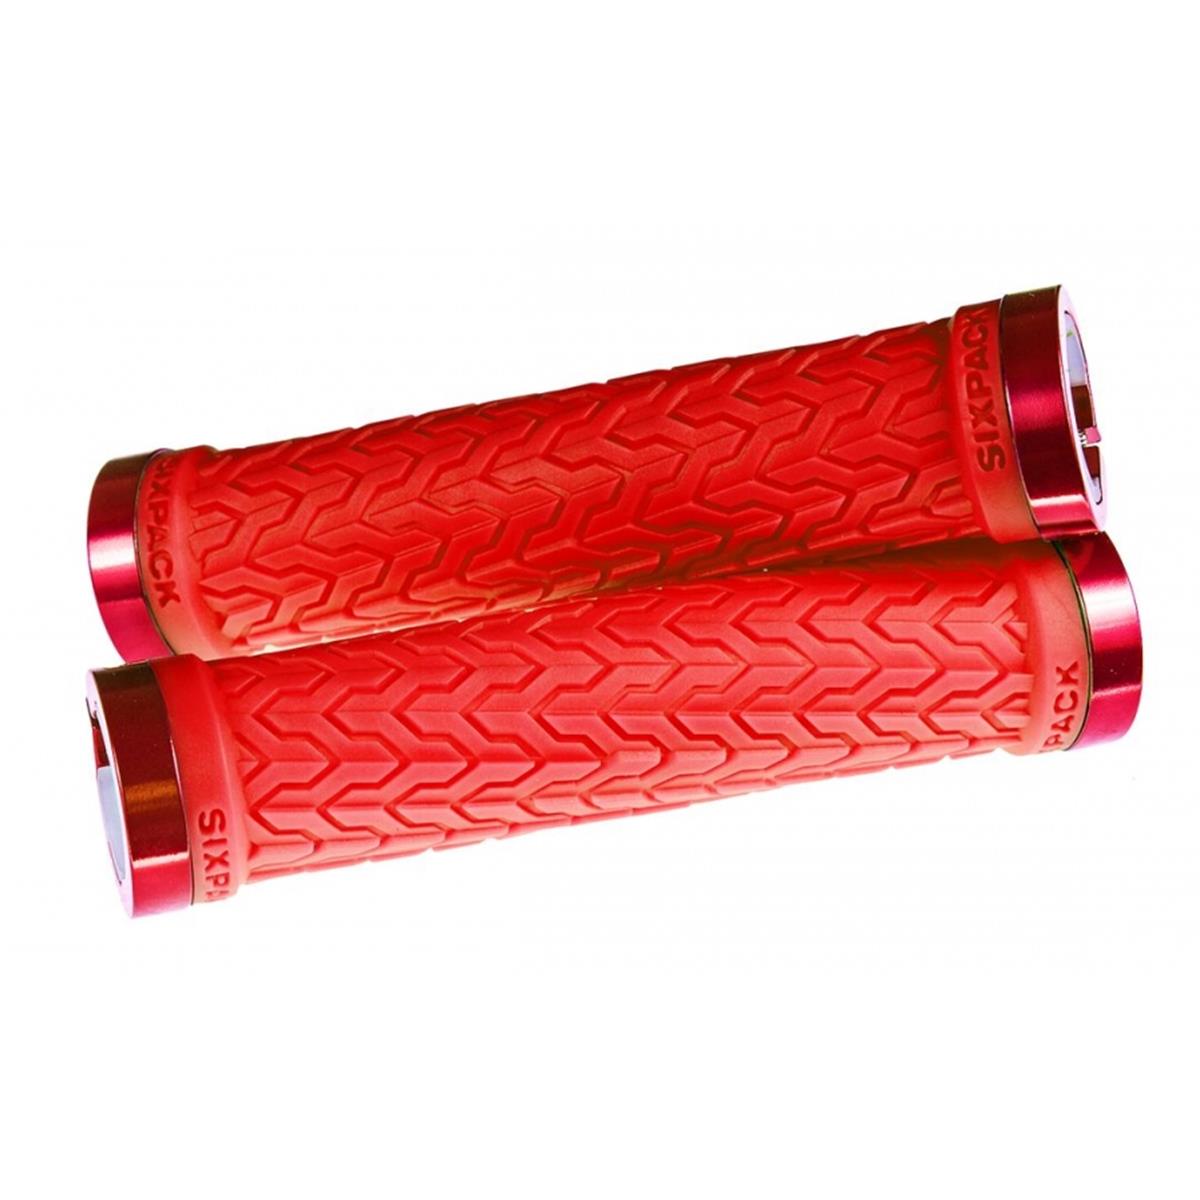 Sixpack MTB Grips S-Trix Red/Red, Lock On System, 125 mm Length